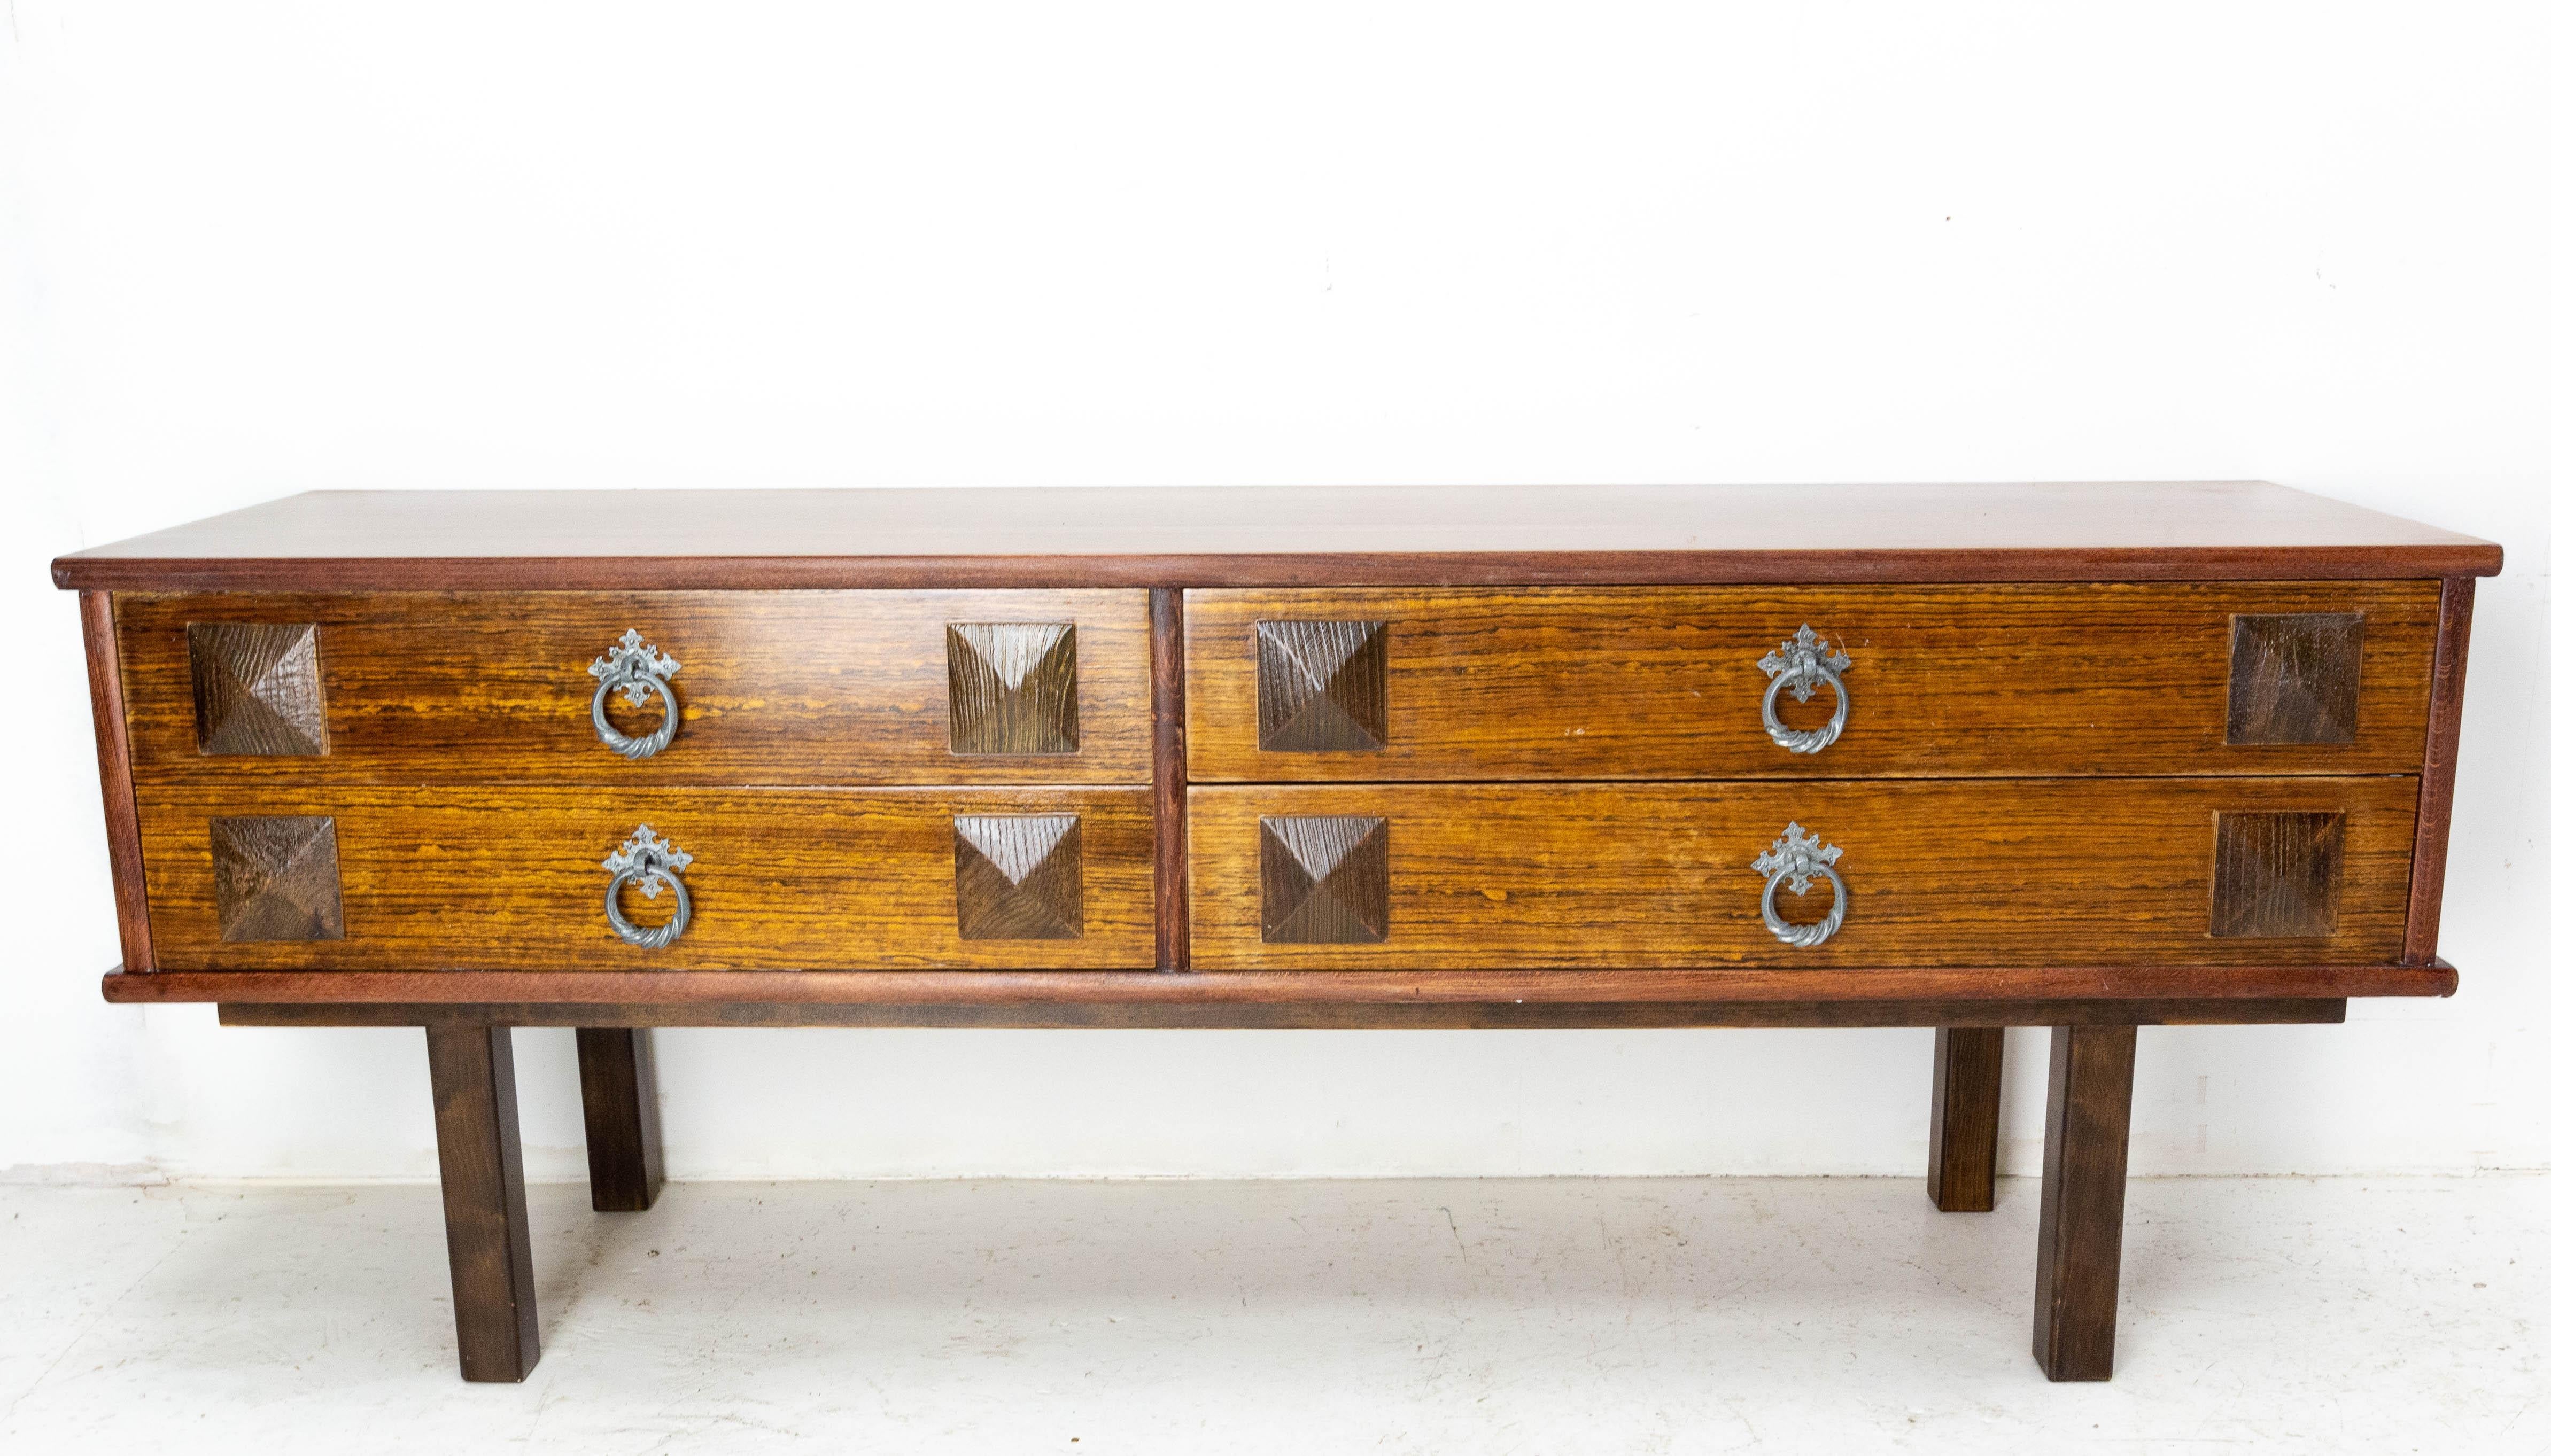 Lounge room console or side table with four drawers.
Wood and metal.
Very characteristic of the 60's style
Very good condition
The legs will be dismantled for the shipping. 

Shipping:
P42 L 147 H 33 33.6Kg.